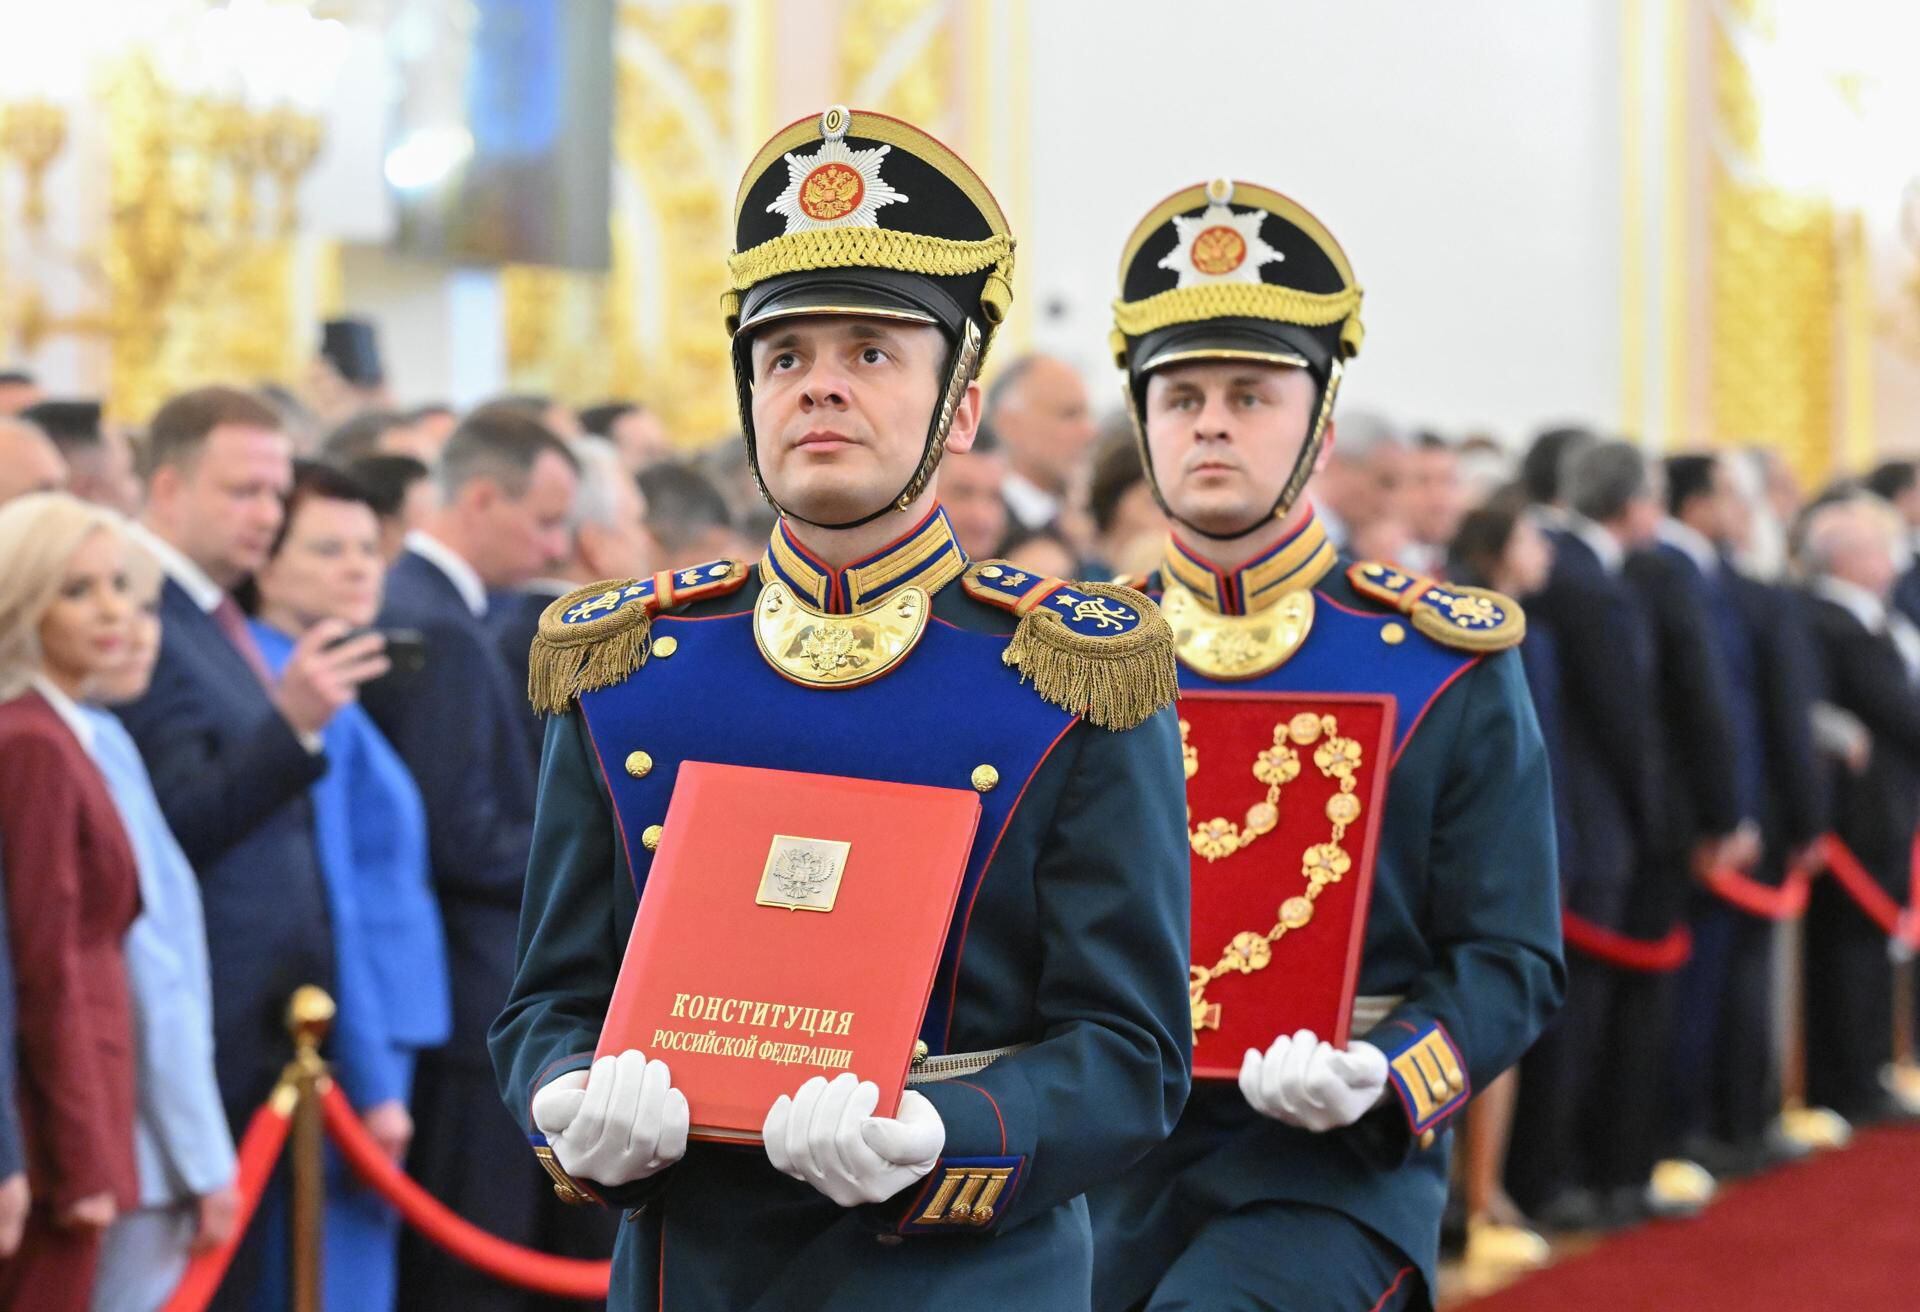 Soldiers from the Presidential Regiment carry a special copy of the Constitution and the president's poster during Vladimir Putin's inauguration ceremony.  (EFE/EPA/GRIGORY SYSOEV/SPUTNIK).